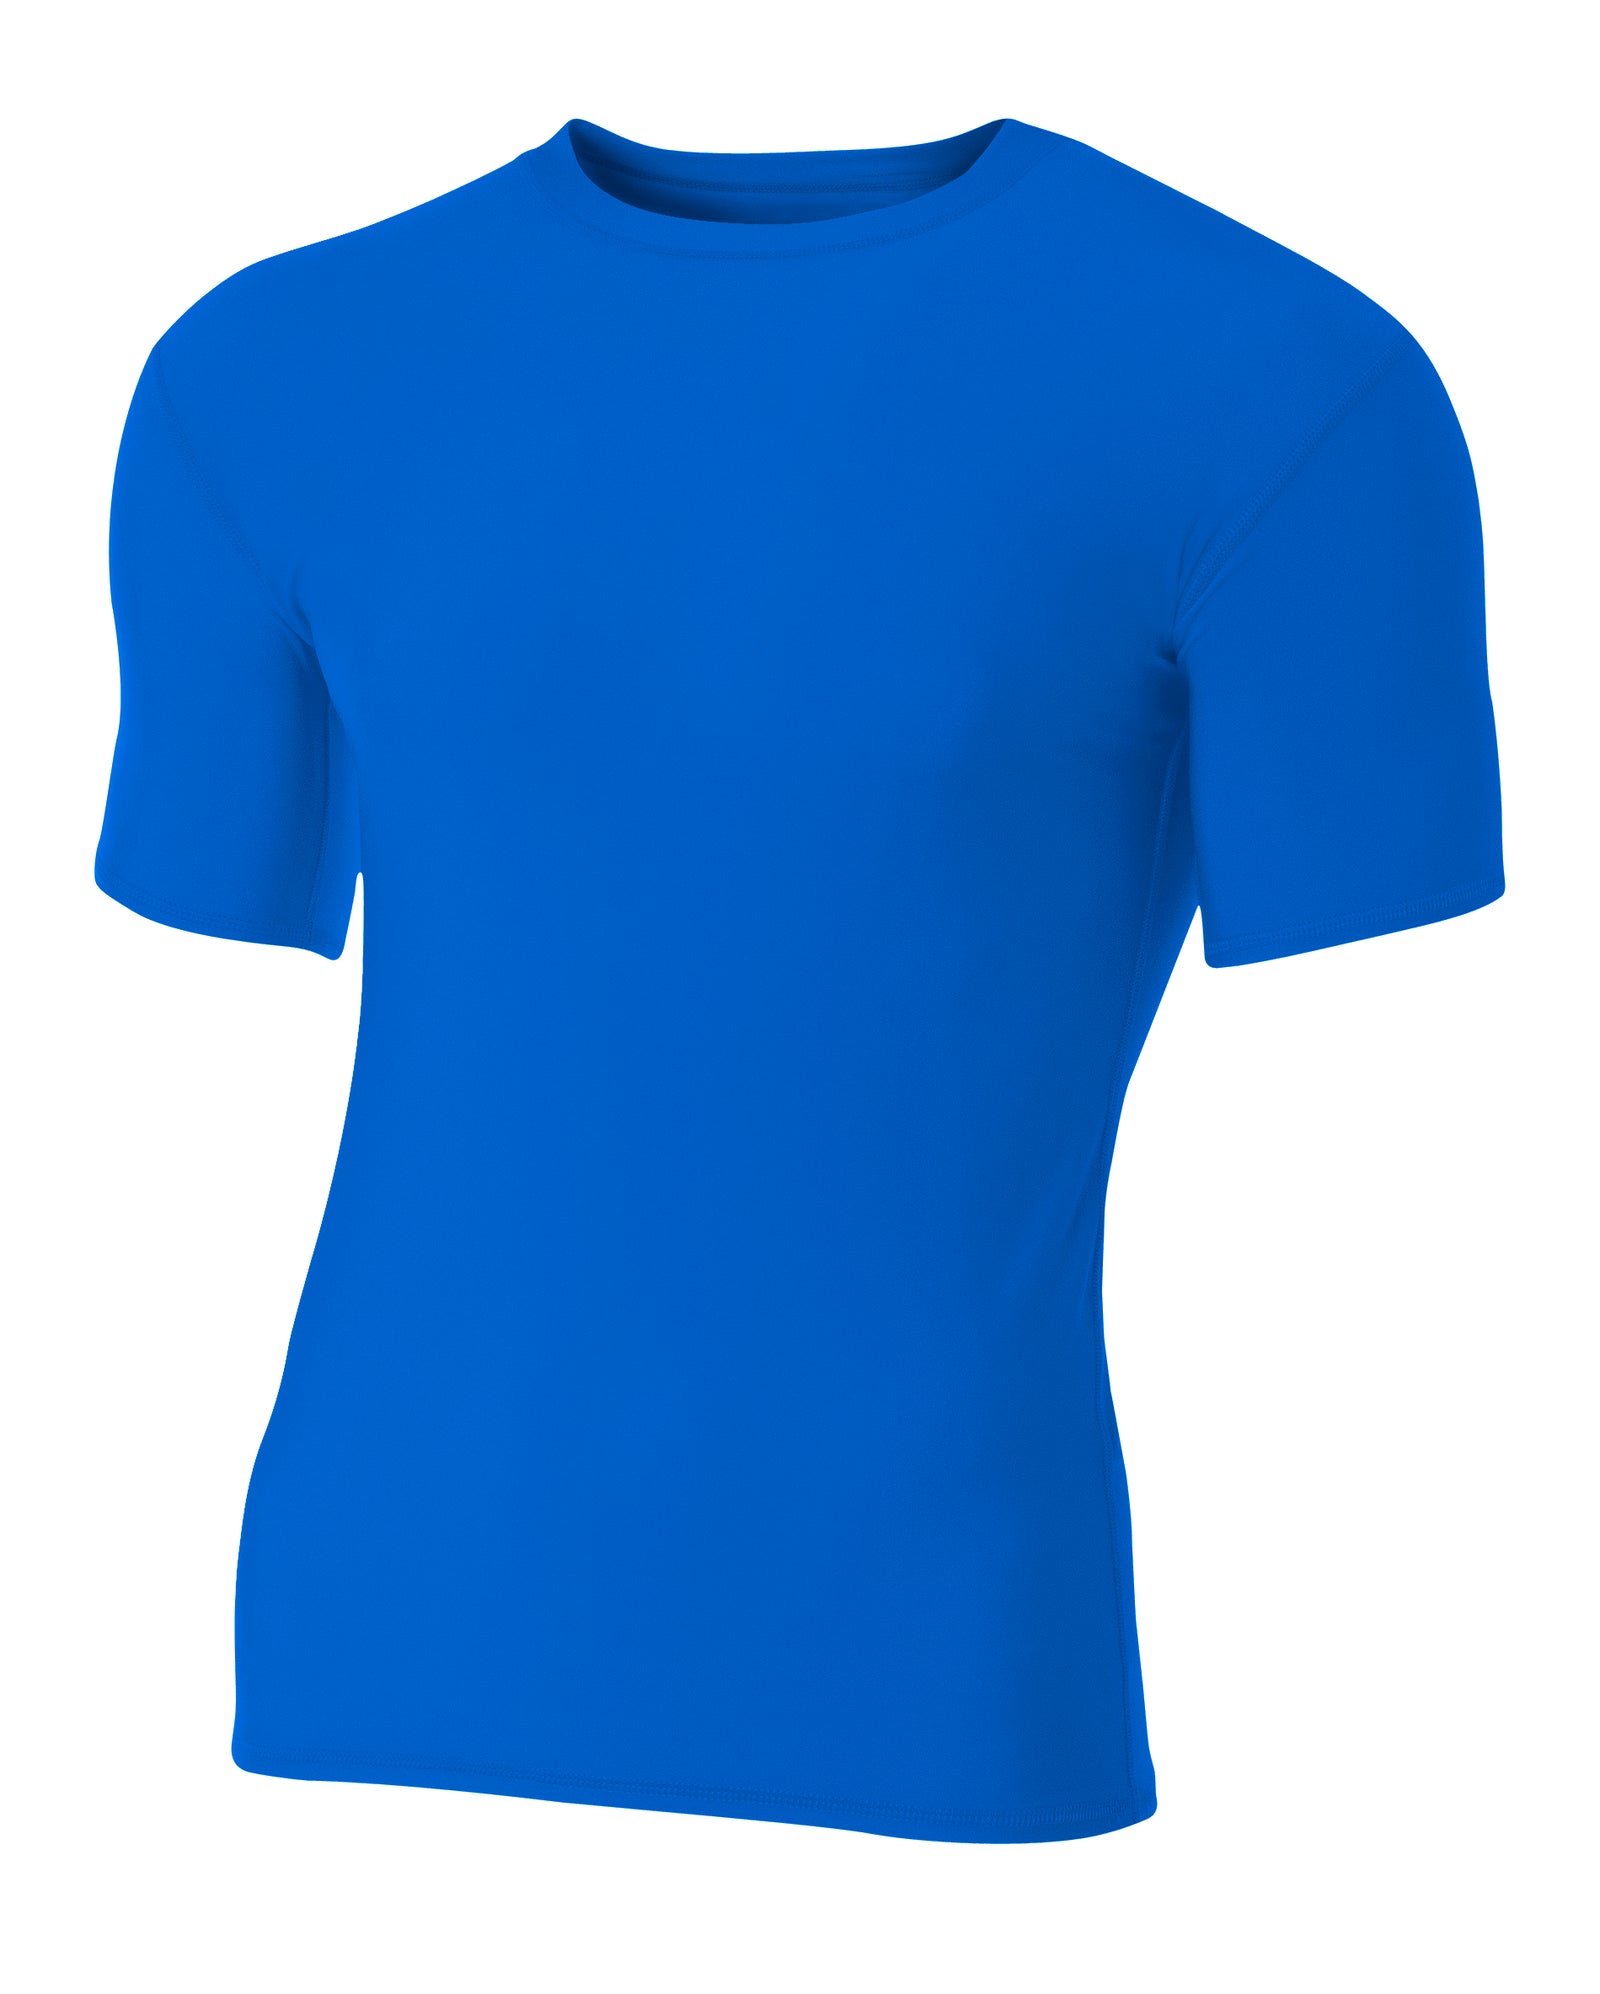 Royal A4 A4 Youth Short Sleeve Compression Crew